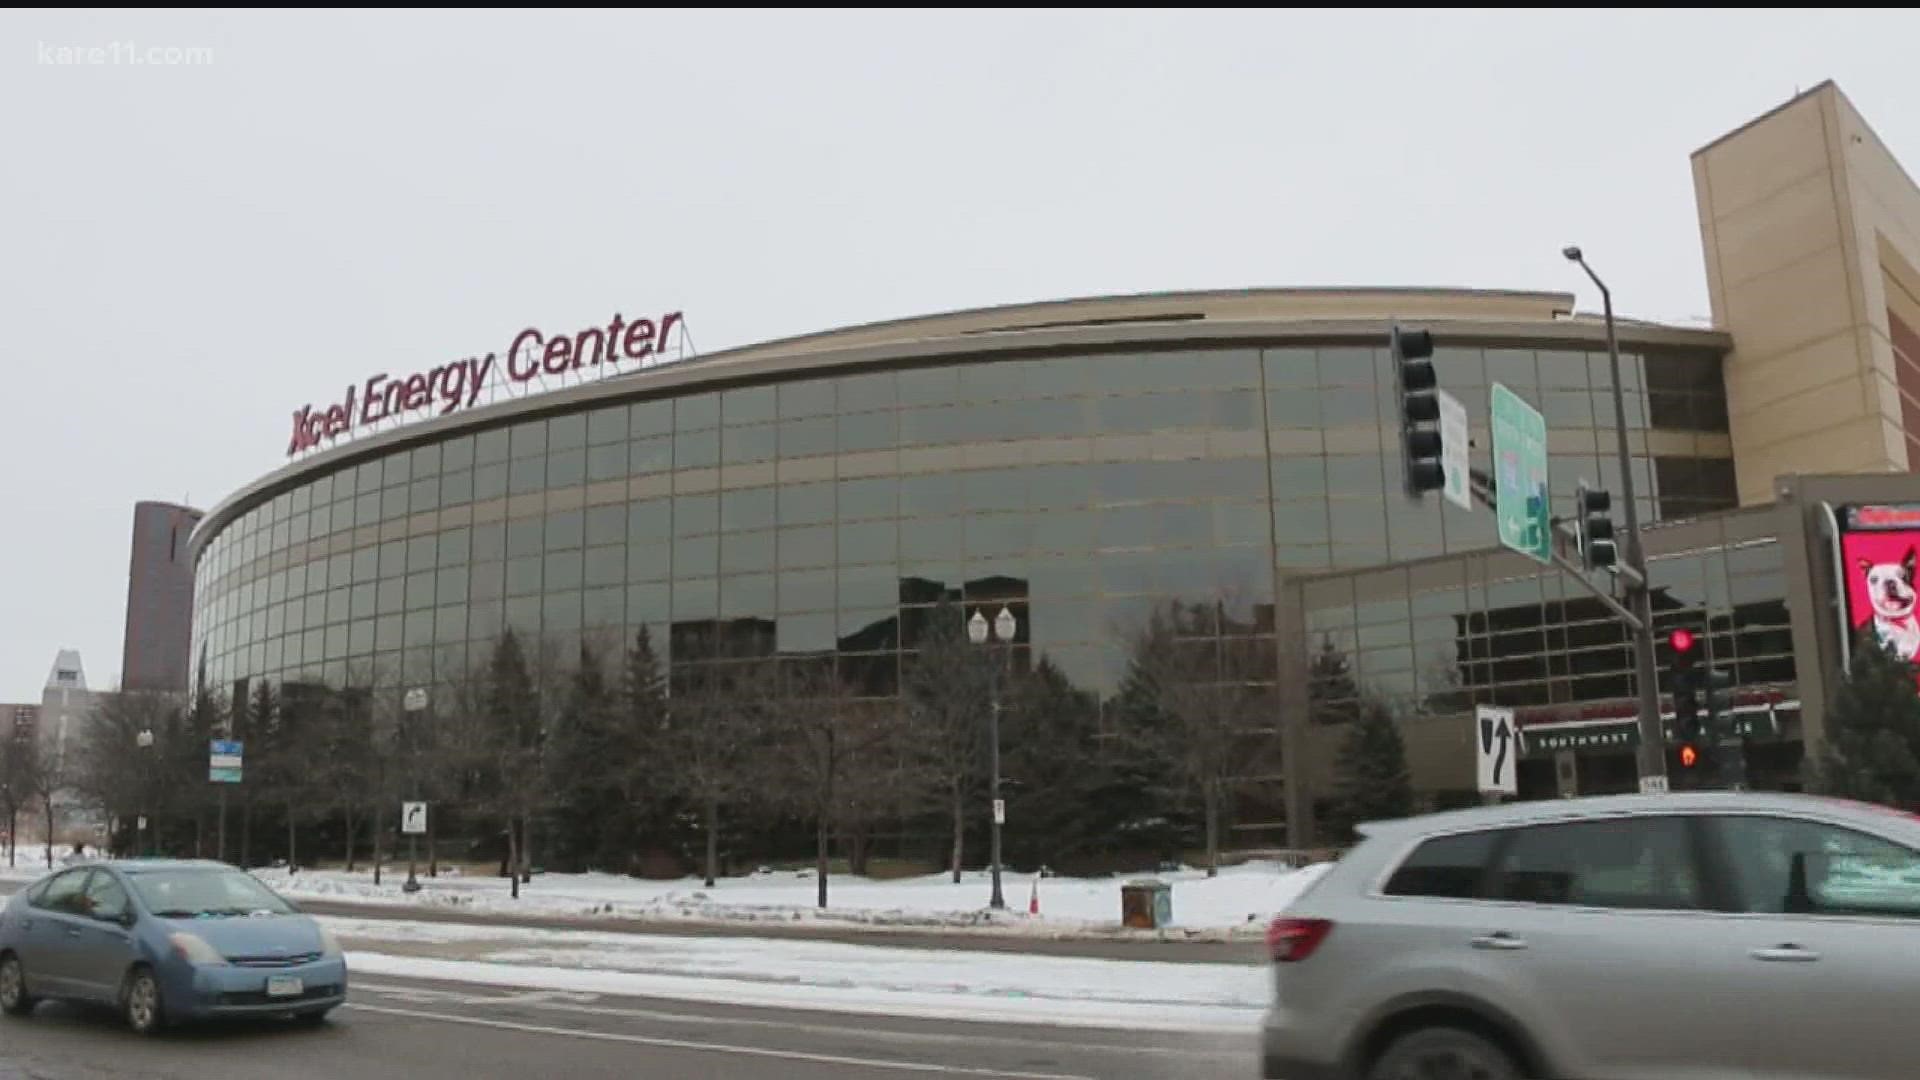 A spokesperson for Target Center told KARE 11 they're adding 30 additional temporary staff members per event, to meet the demand.